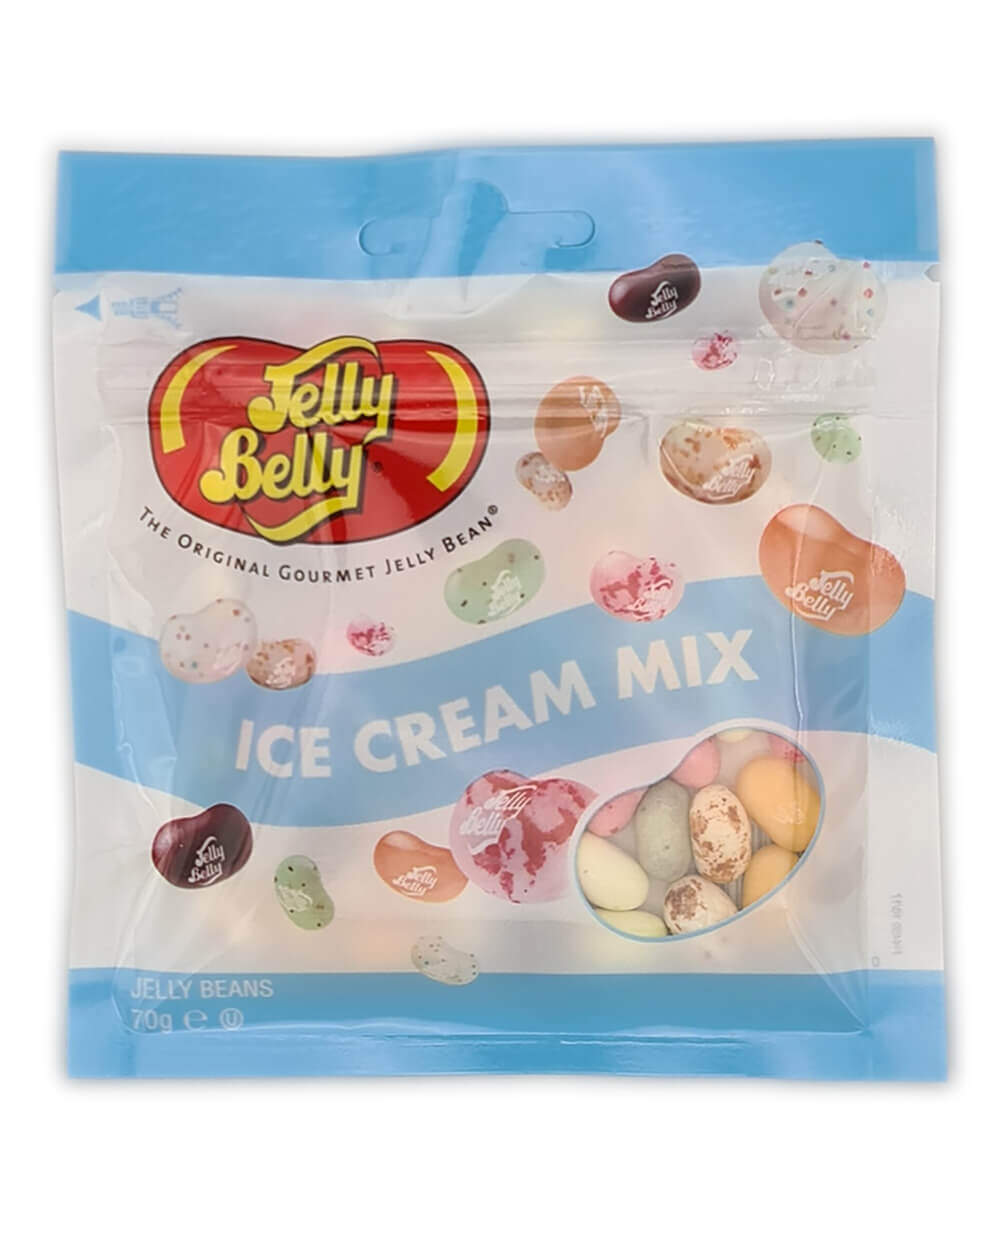 Jelly Belly Ice Cream Mix Jelly Beans 70g Bag - Land of Sweets